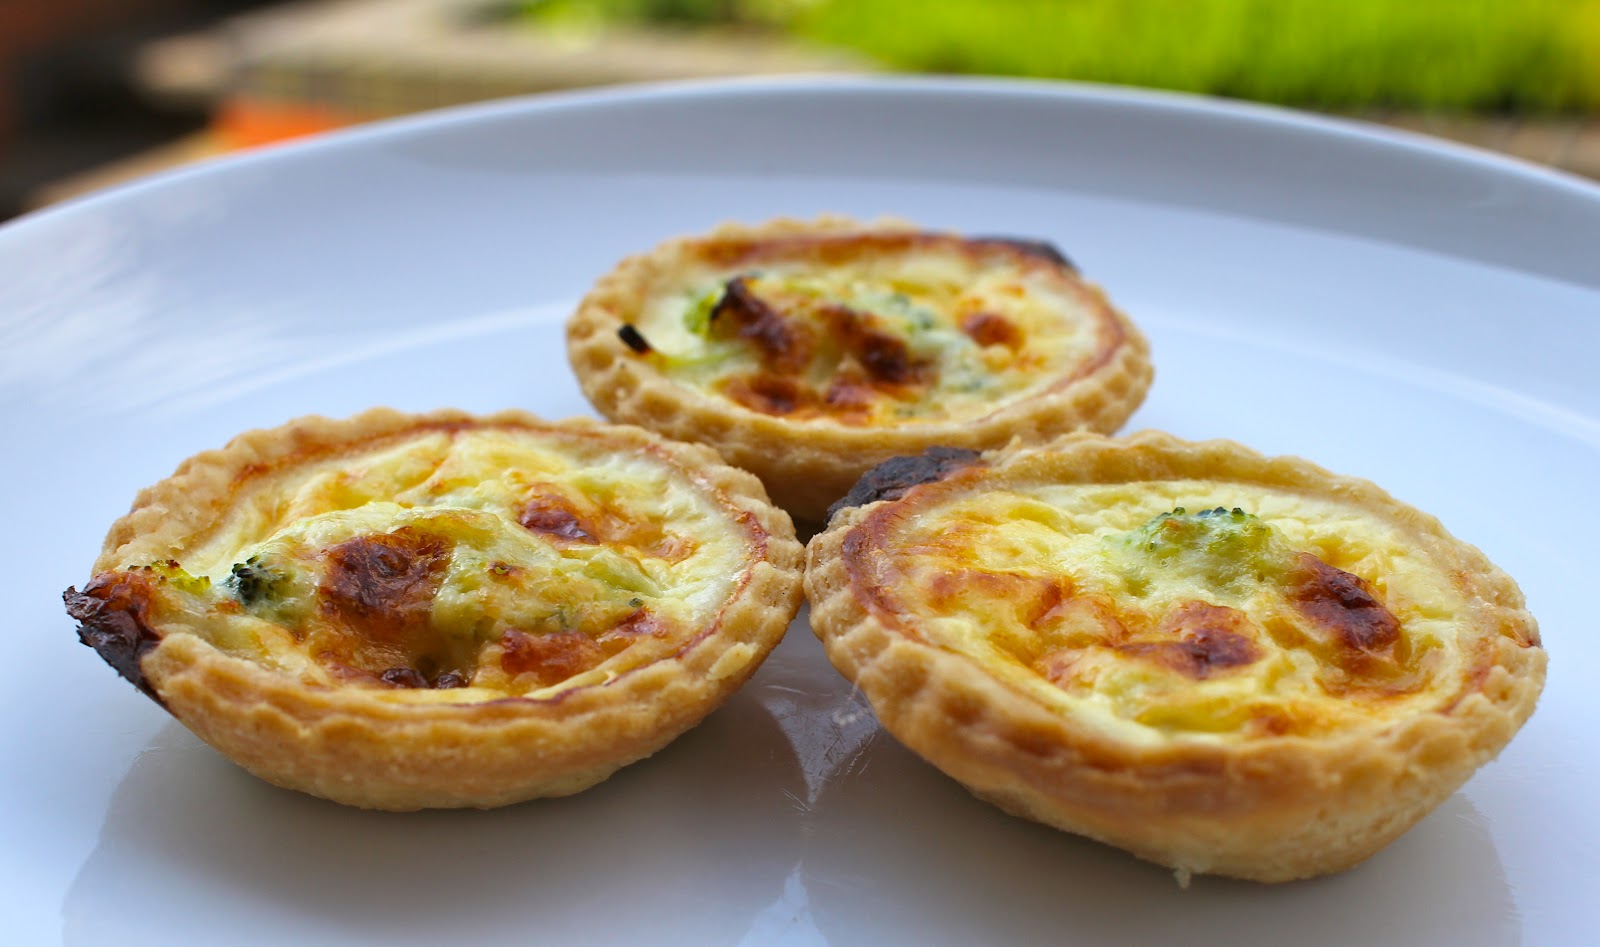 mamacook: Broccoli and Cheddar Mini Quiches for the Whole Family